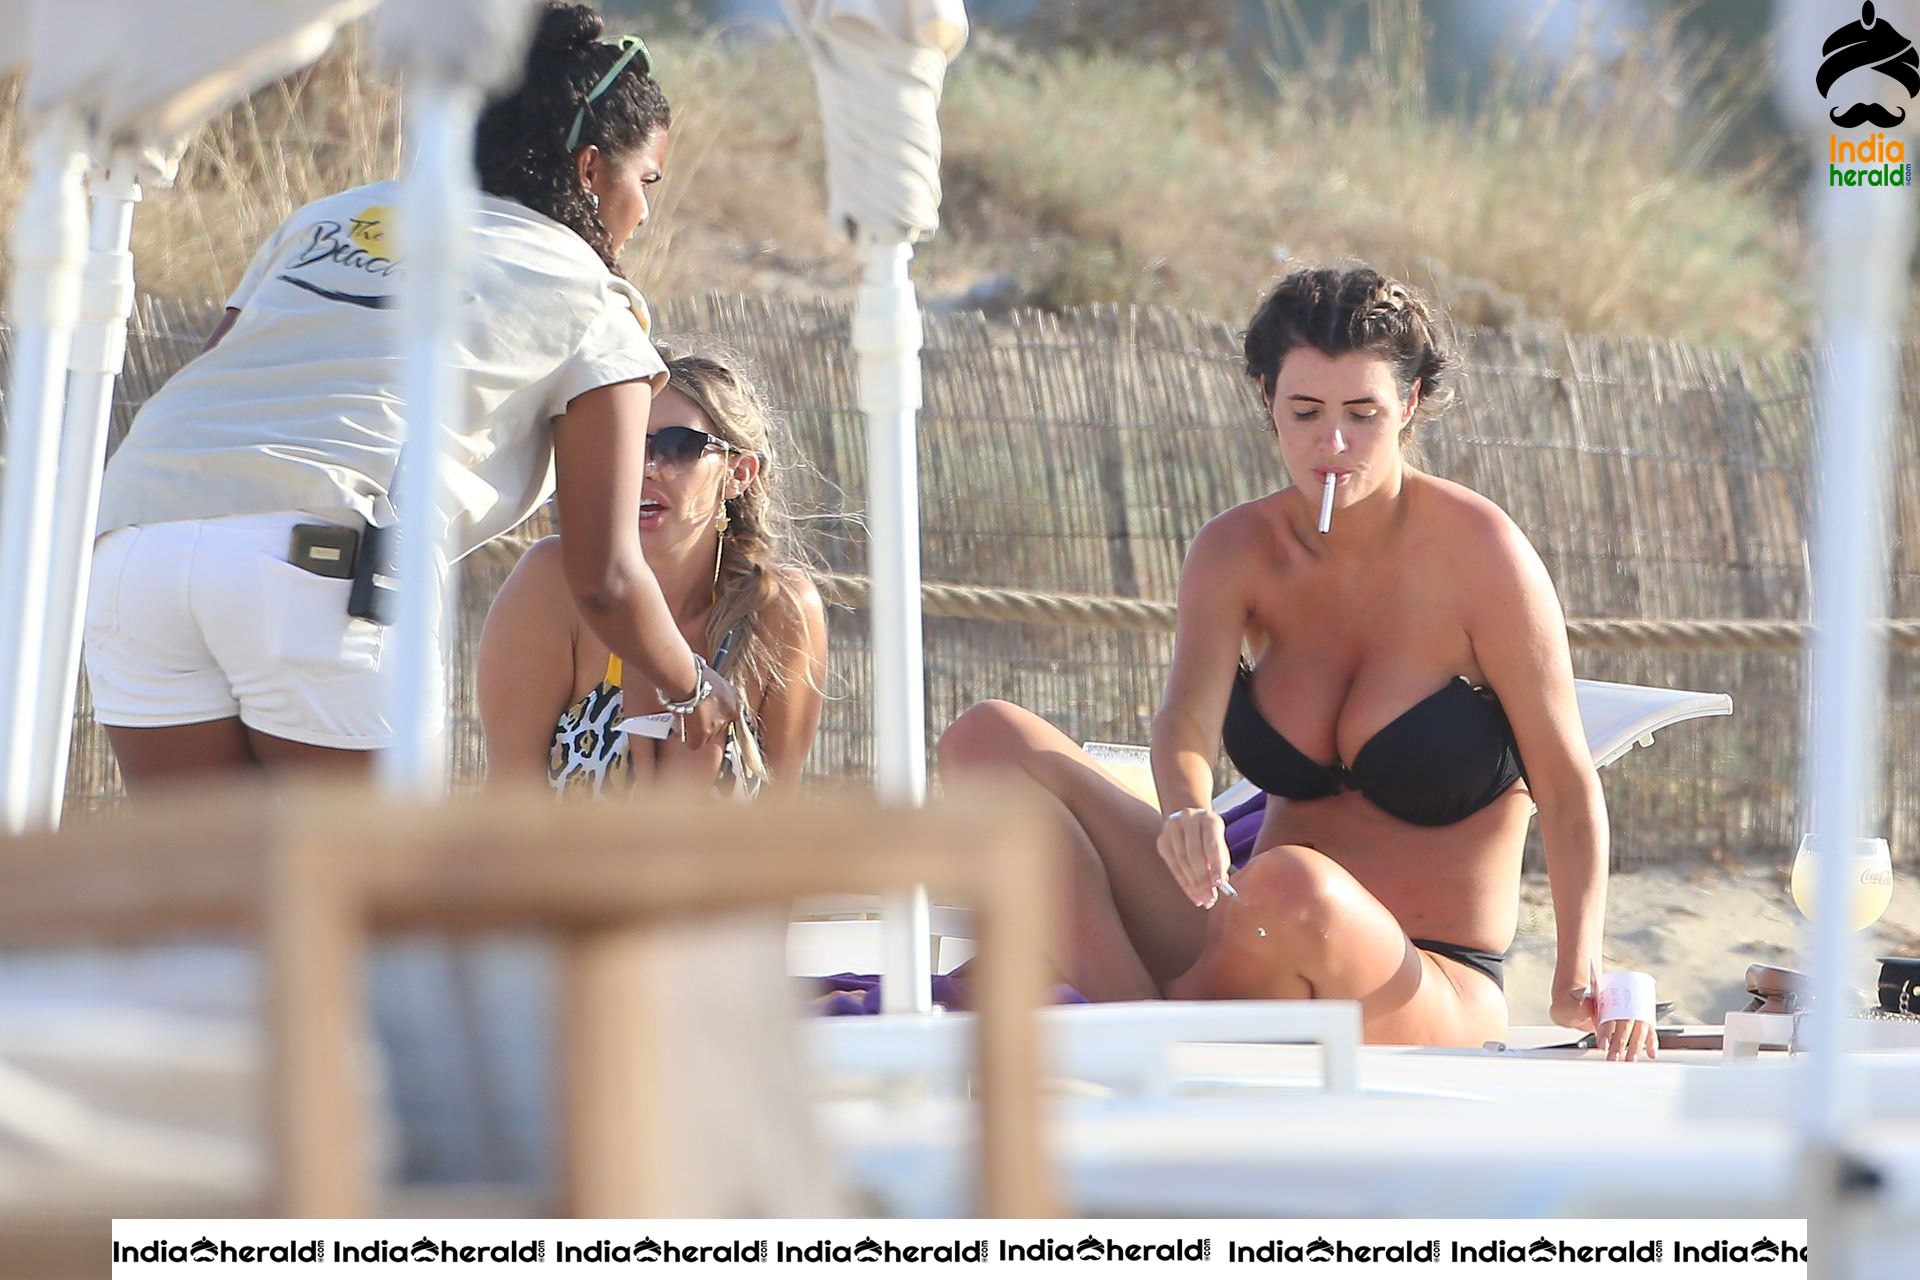 Helen Wood caught in Bikini as she exposes her Big Assets at a beach club in Ibiza Set 1